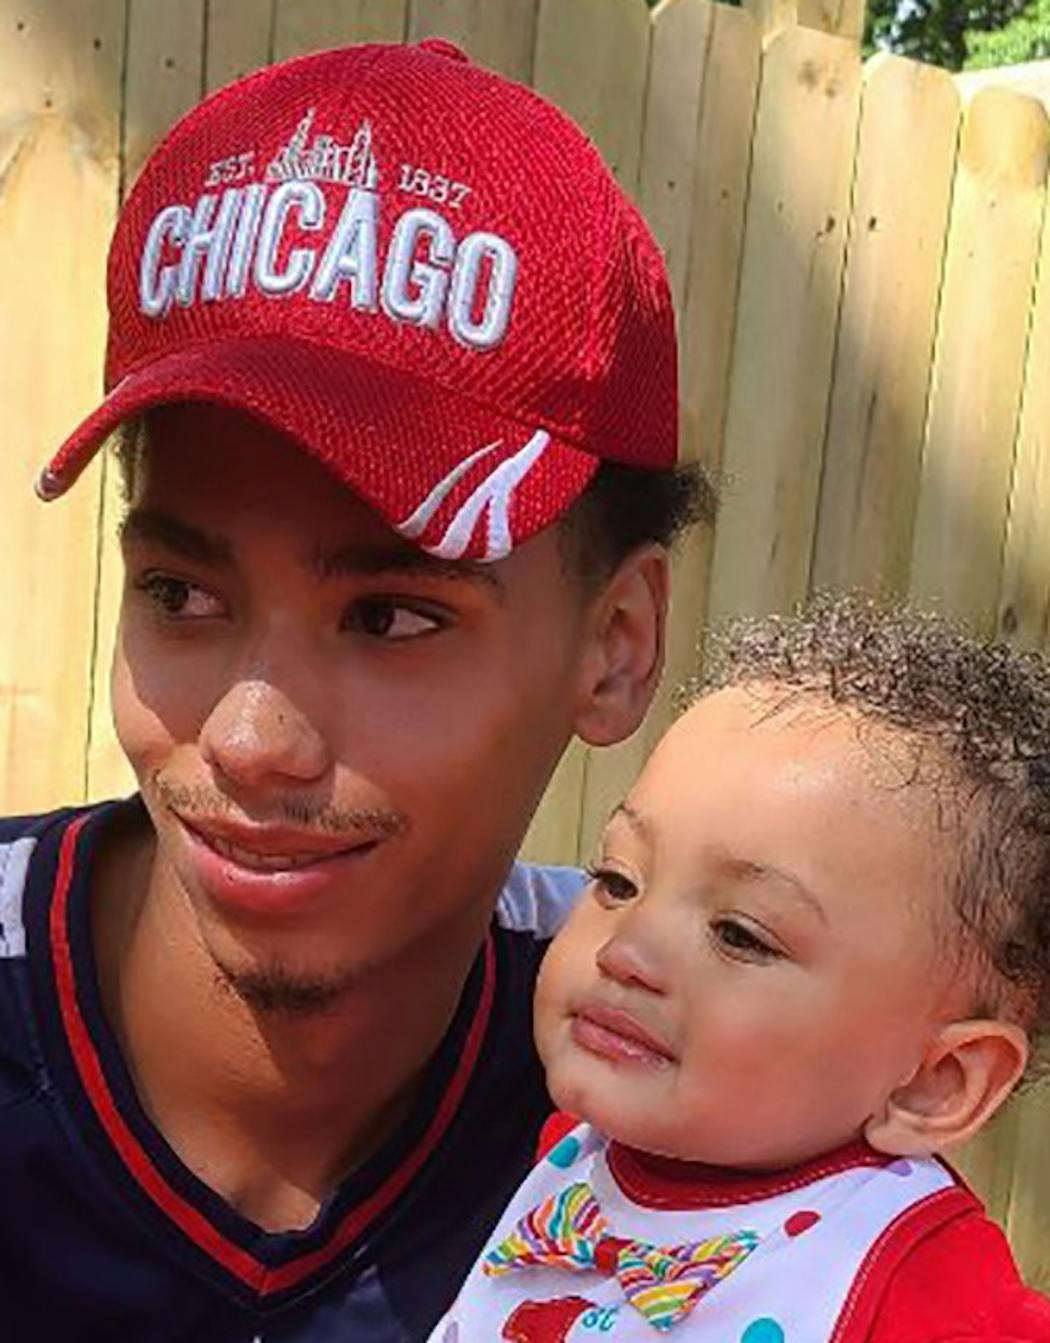 Daunte Wright, shown with his son, Daunte Jr.